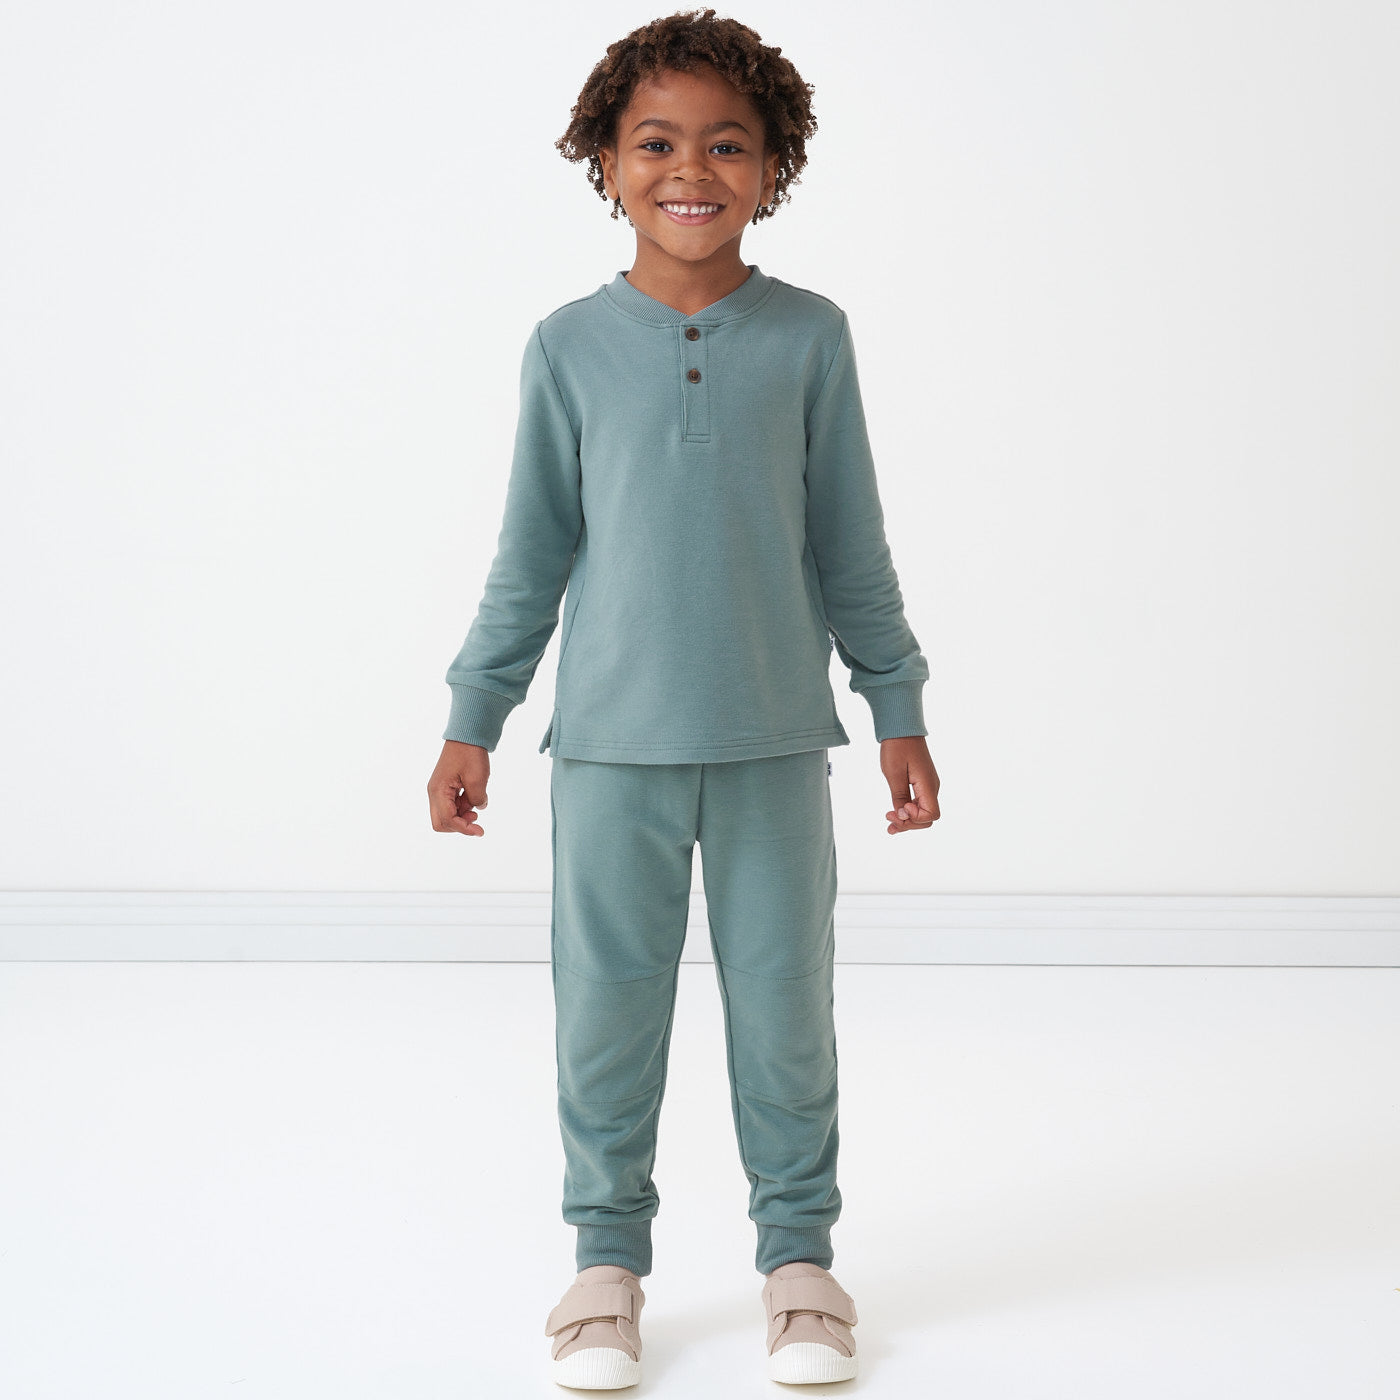 Child wearing a Vintage Teal henley tee and matching joggers